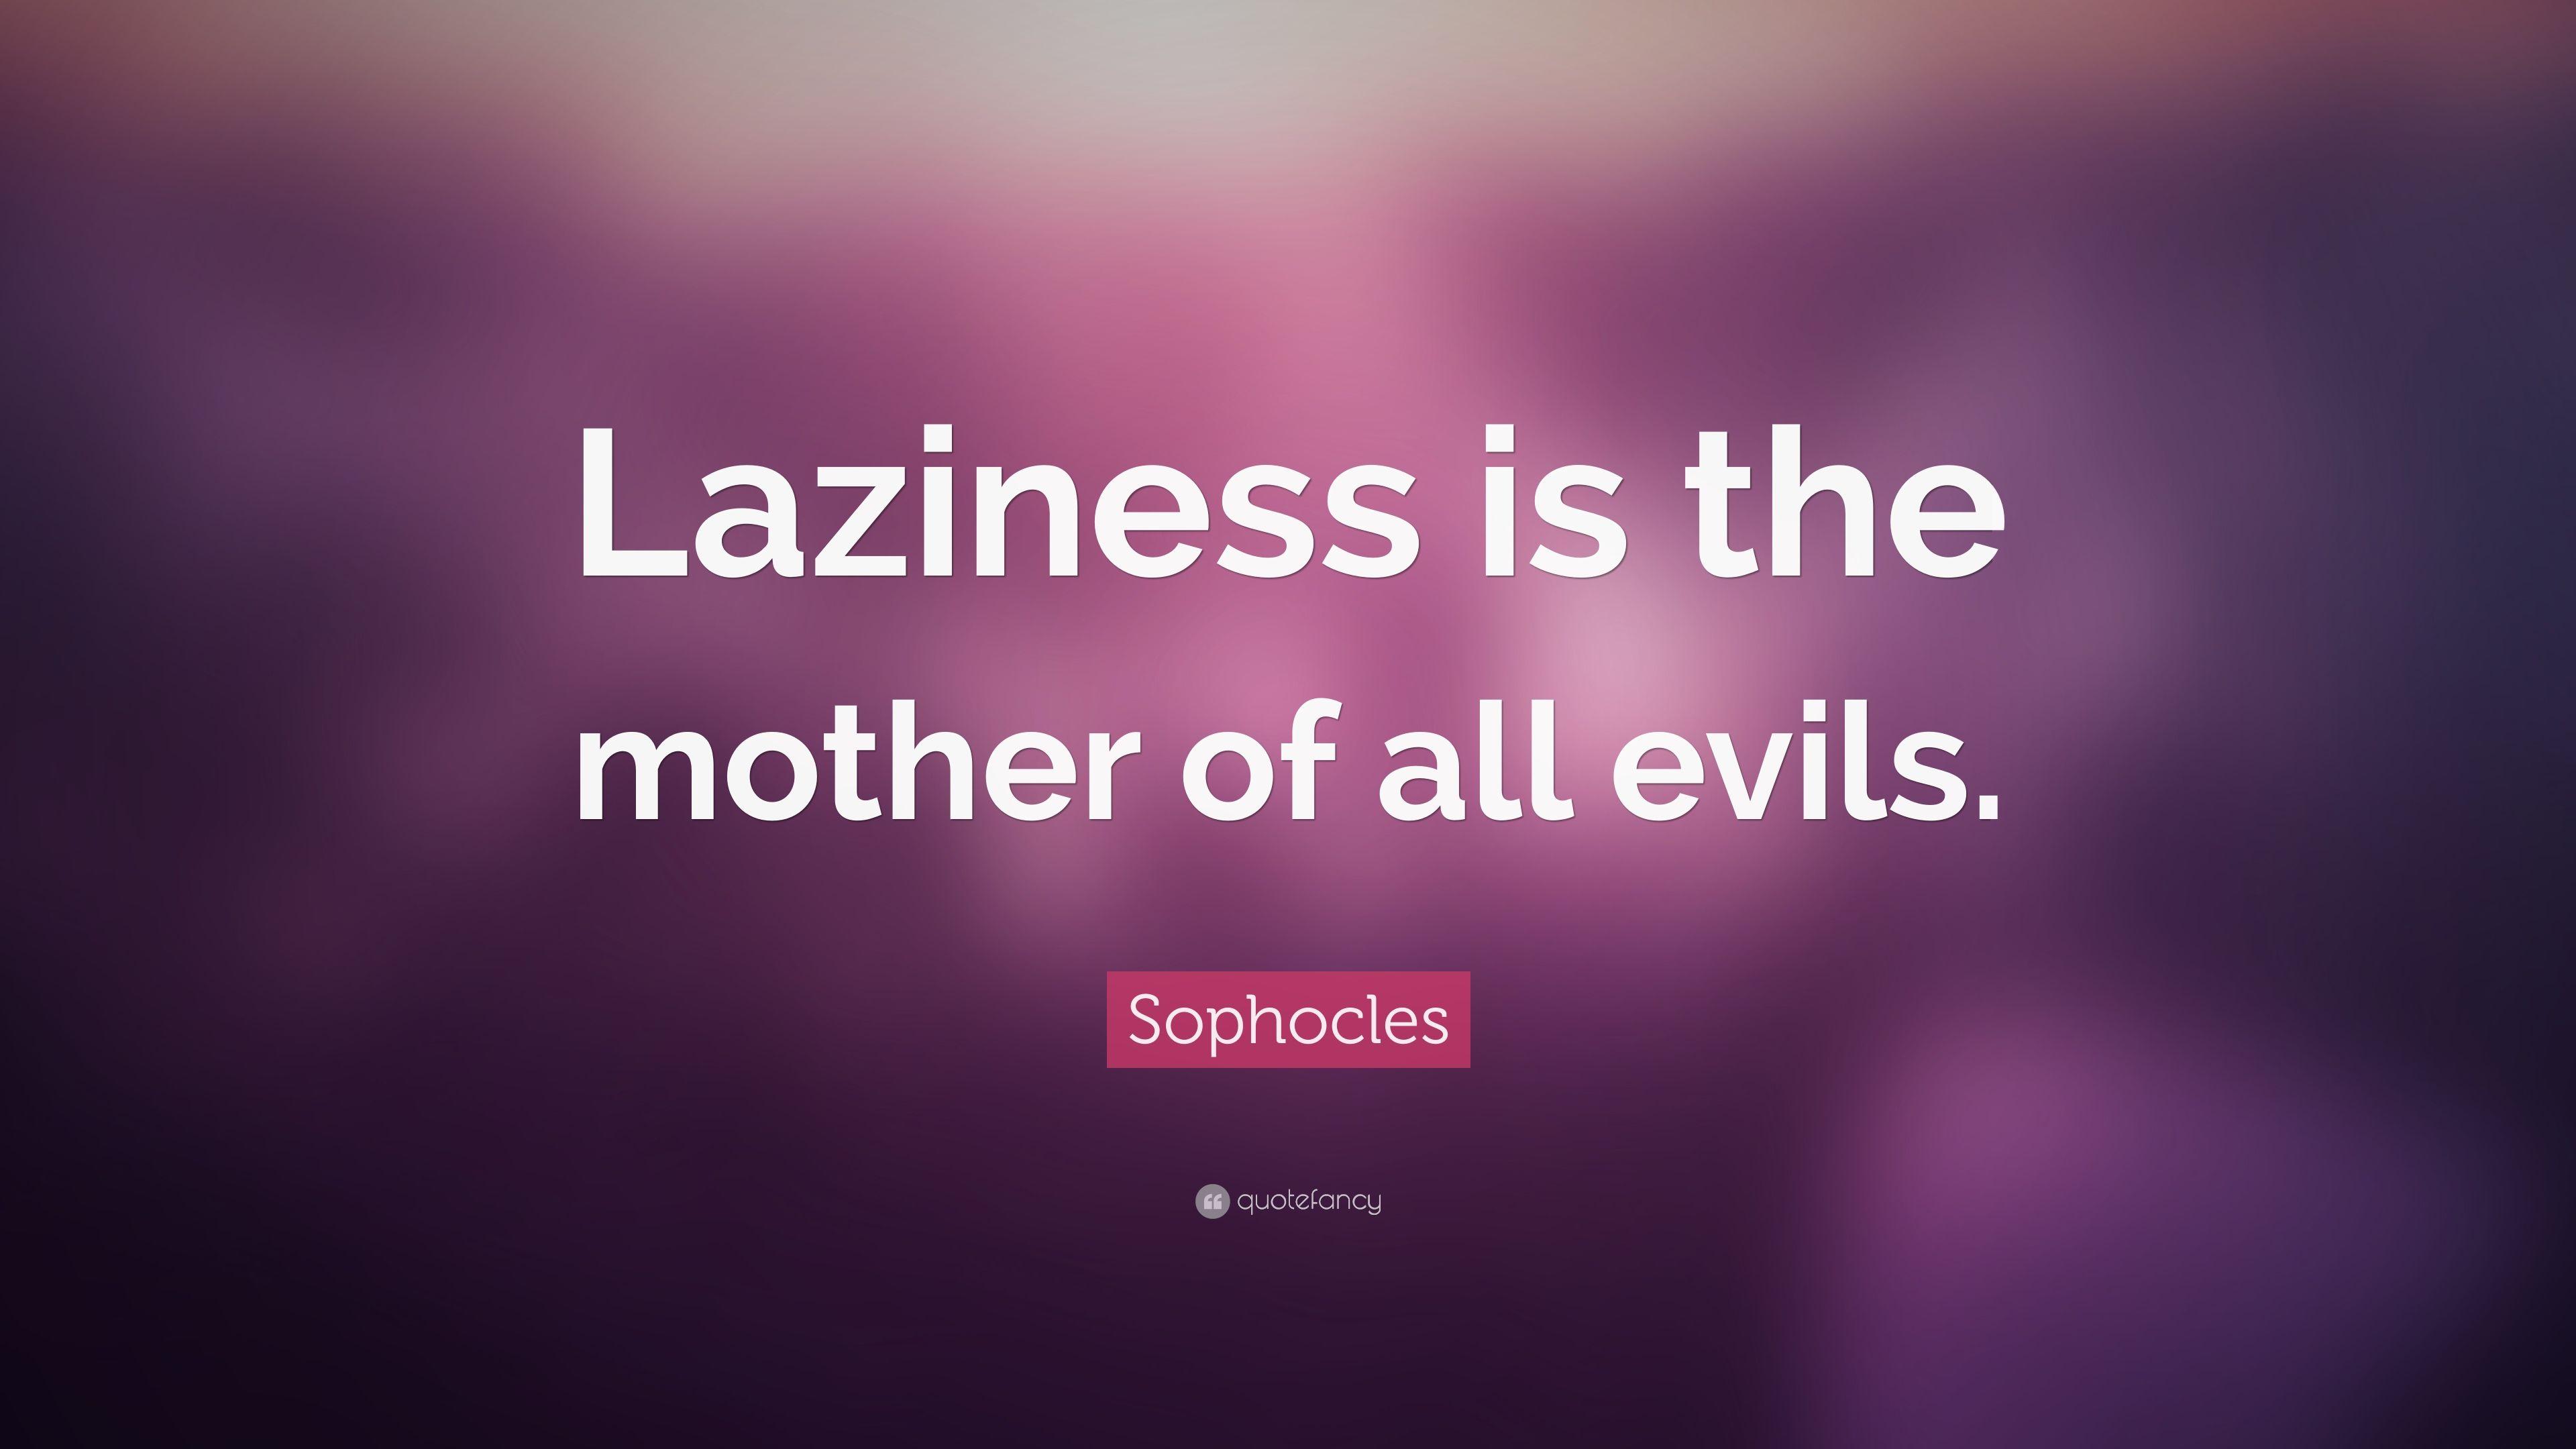 Sophocles Quote: “Laziness is the mother of all evils.” 7